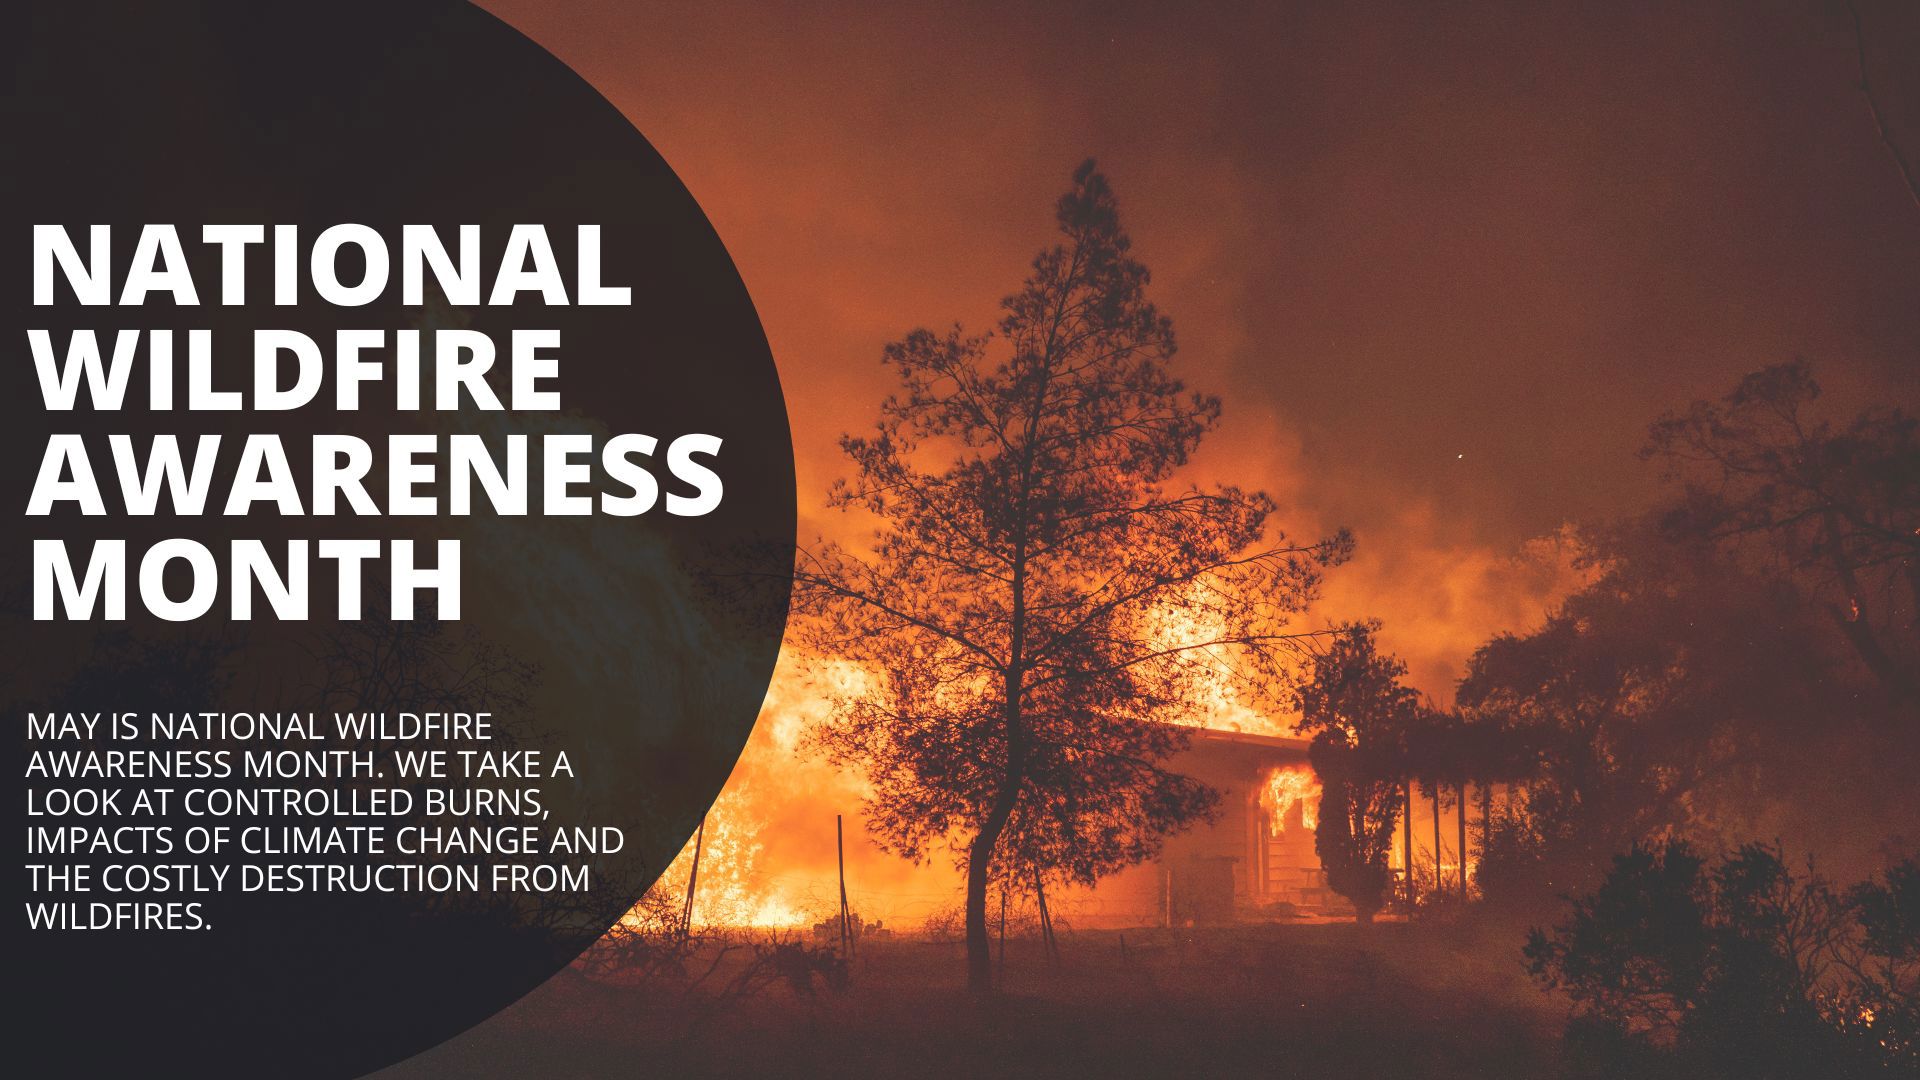 May is National Wildfire Awareness Month. We take a look at controlled burns, impacts of climate change and the costly destruction from wildfires.